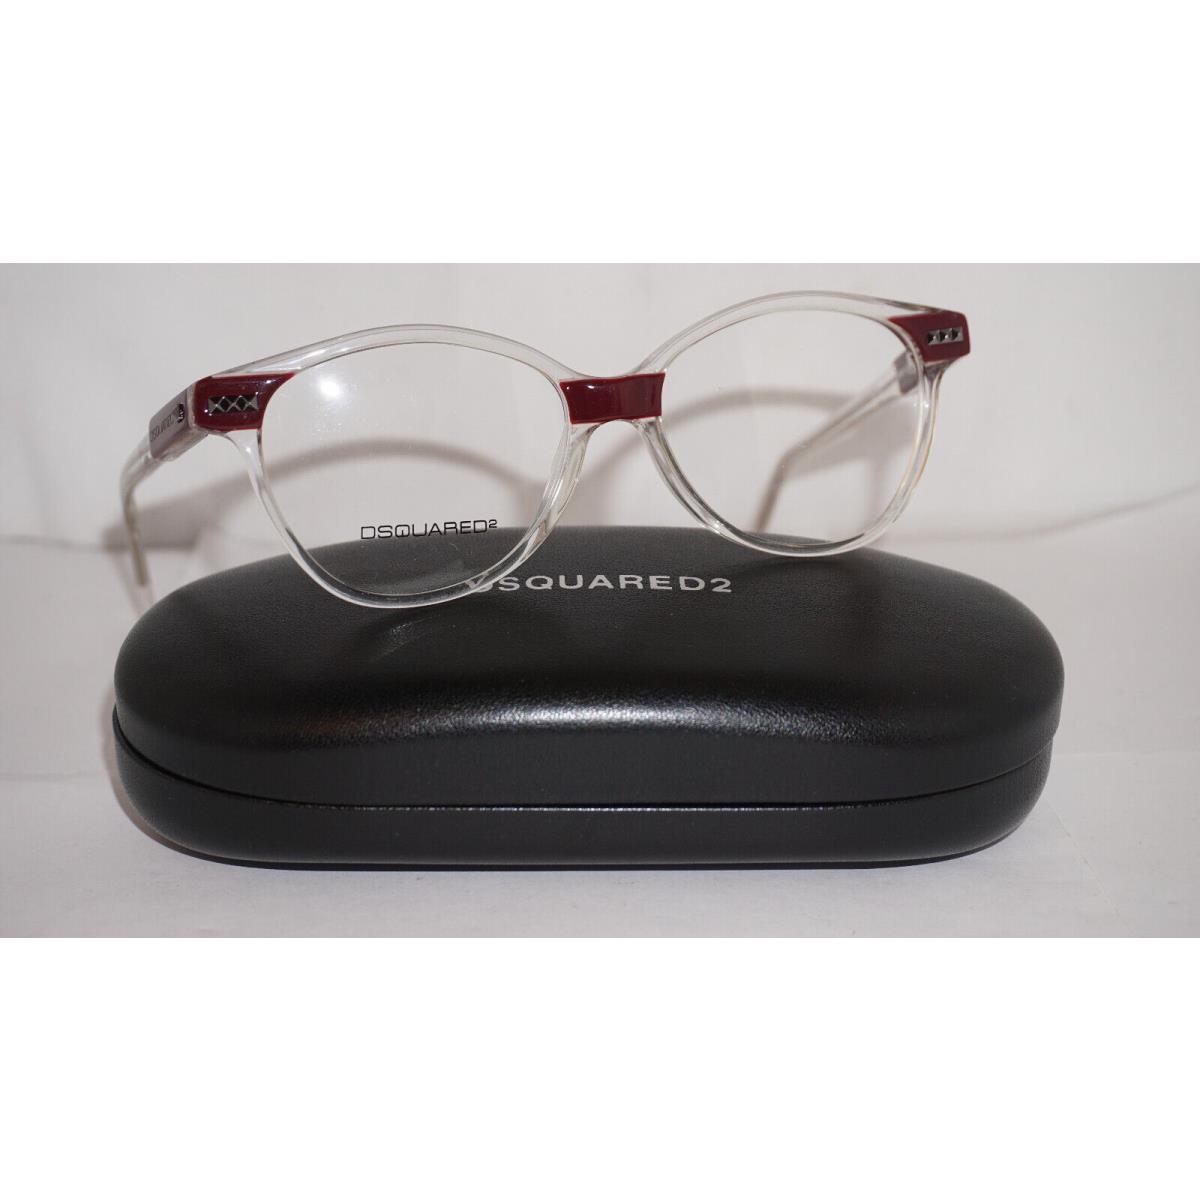 DSQUARED2 Eyeglasses Clear Red DQ5080 071 53 15 140